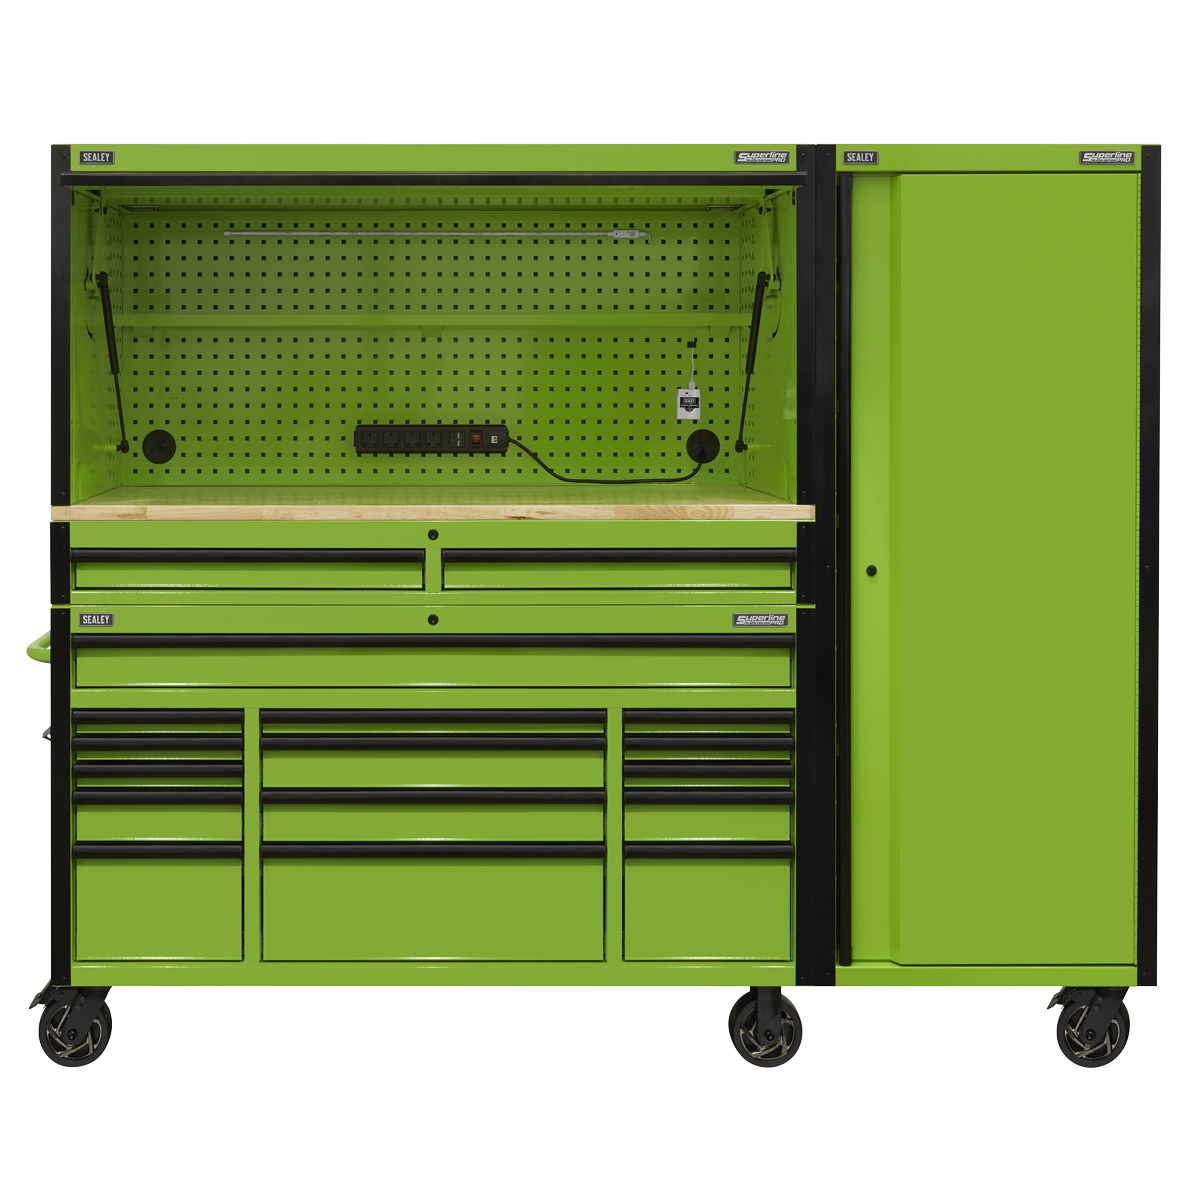 Sealey 15 Drawer 1549mm Mobile Trolley with Wooden Worktop, Hutch, 2 Drawer Riser & Side Locker AP6115BECOMBO2